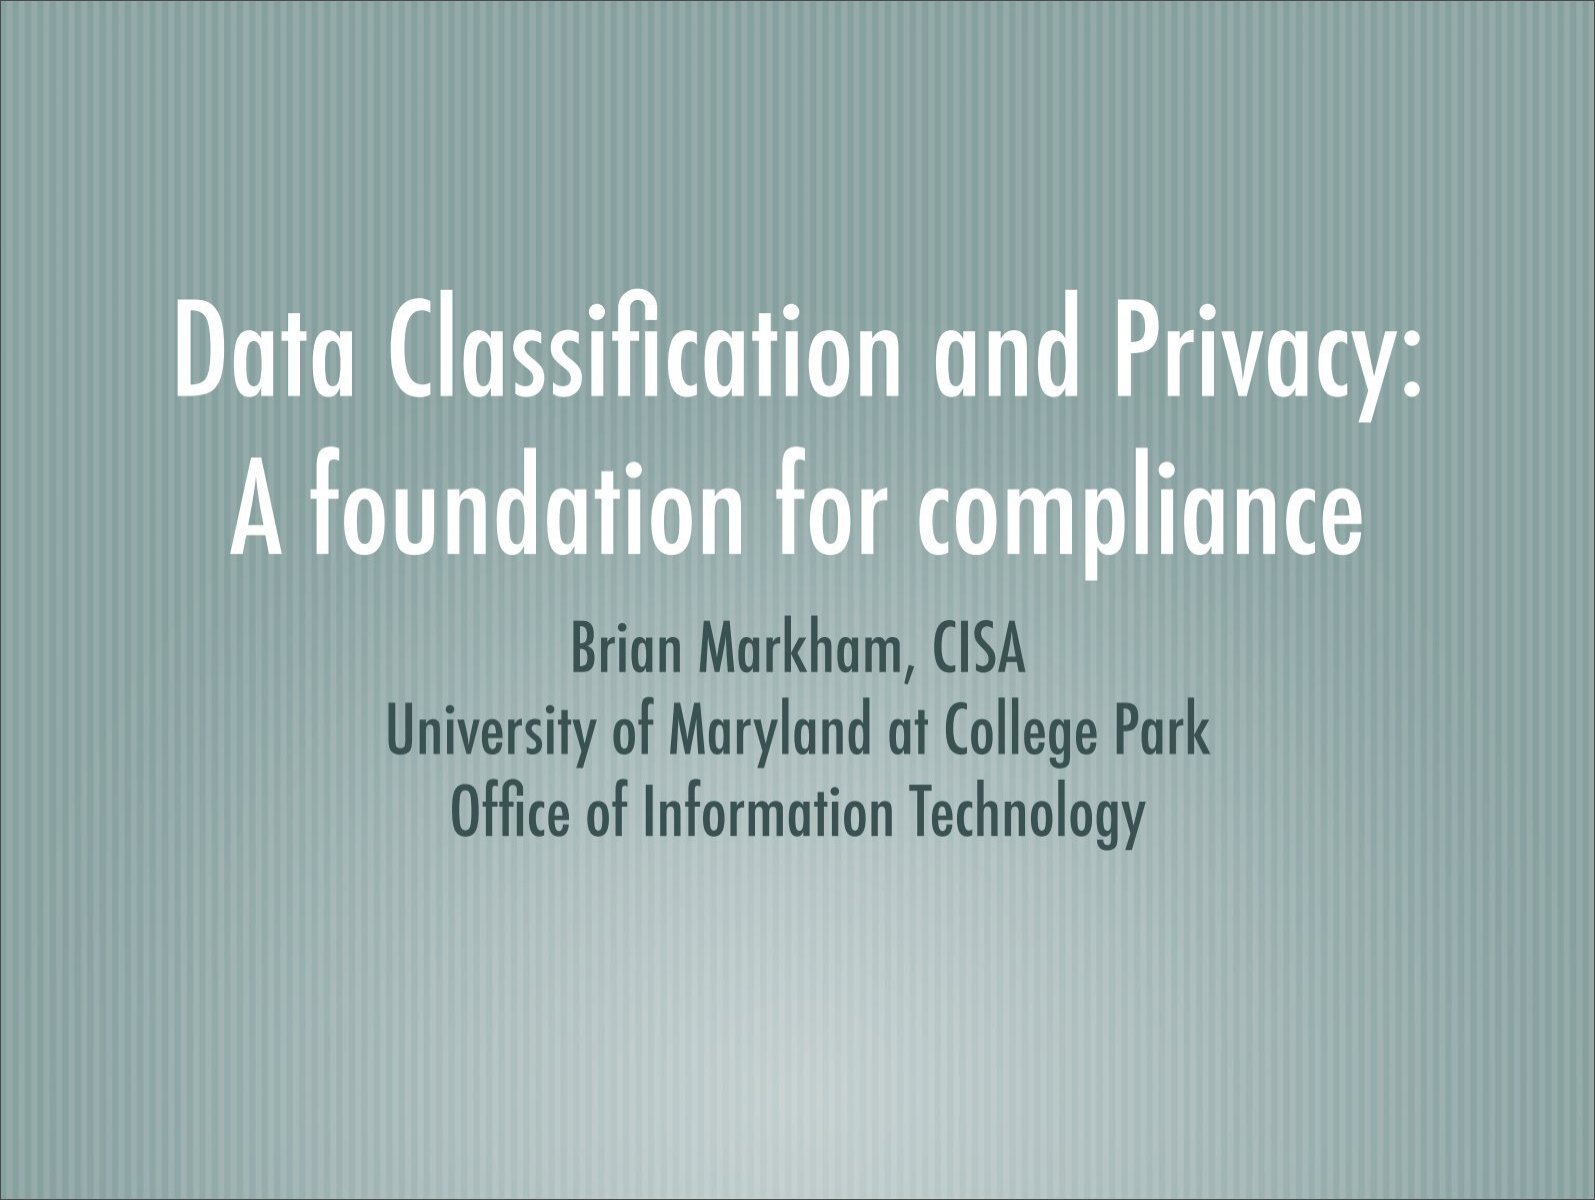 Data Classification And Privacy Office Of Information Technology